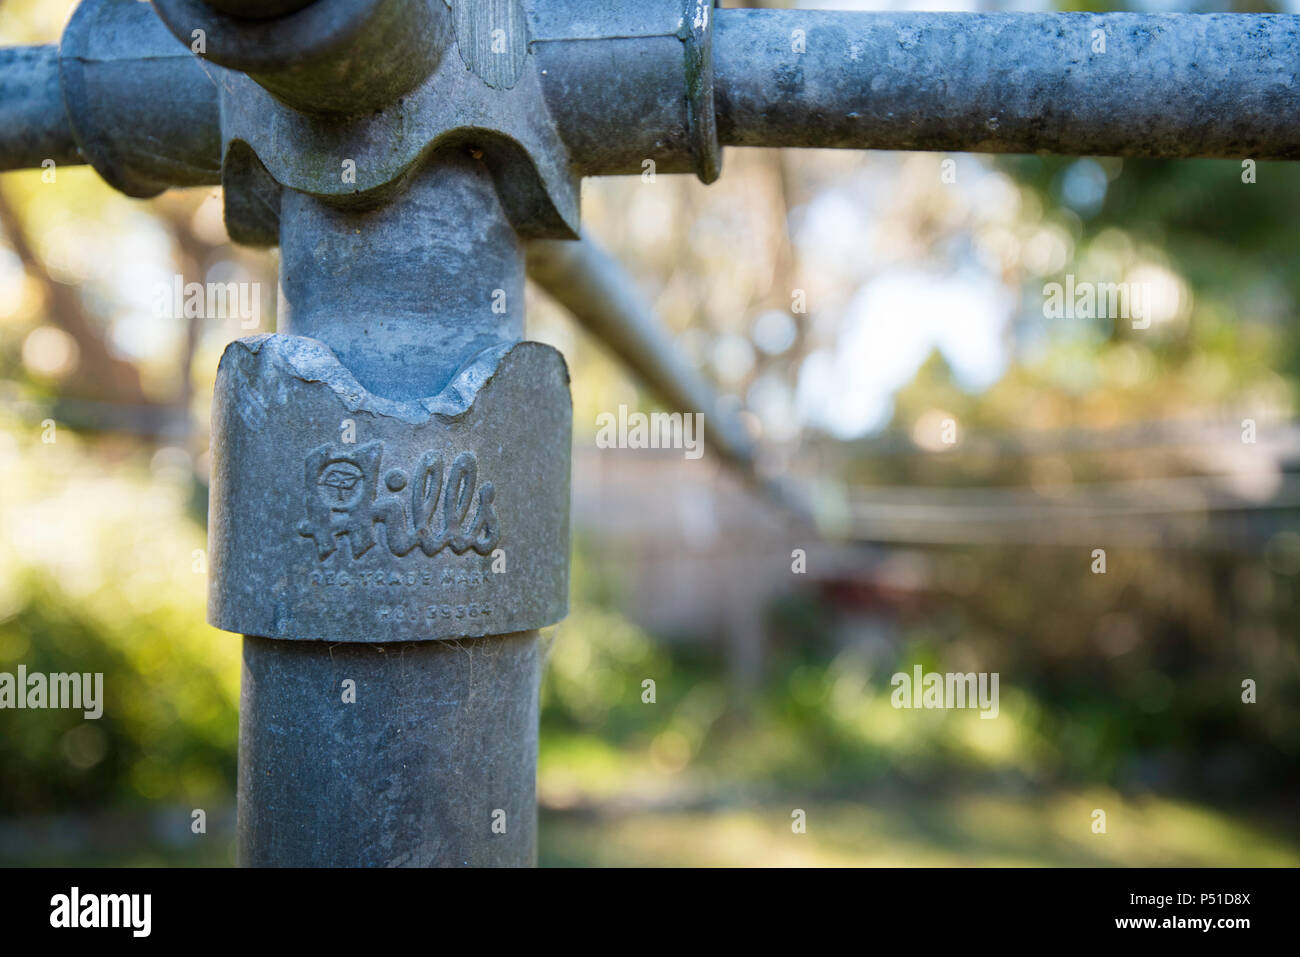 A partial view of the centre post and brand name of a 1960's Hills Hoist steel clothes drying line in a backyard in Australia Stock Photo